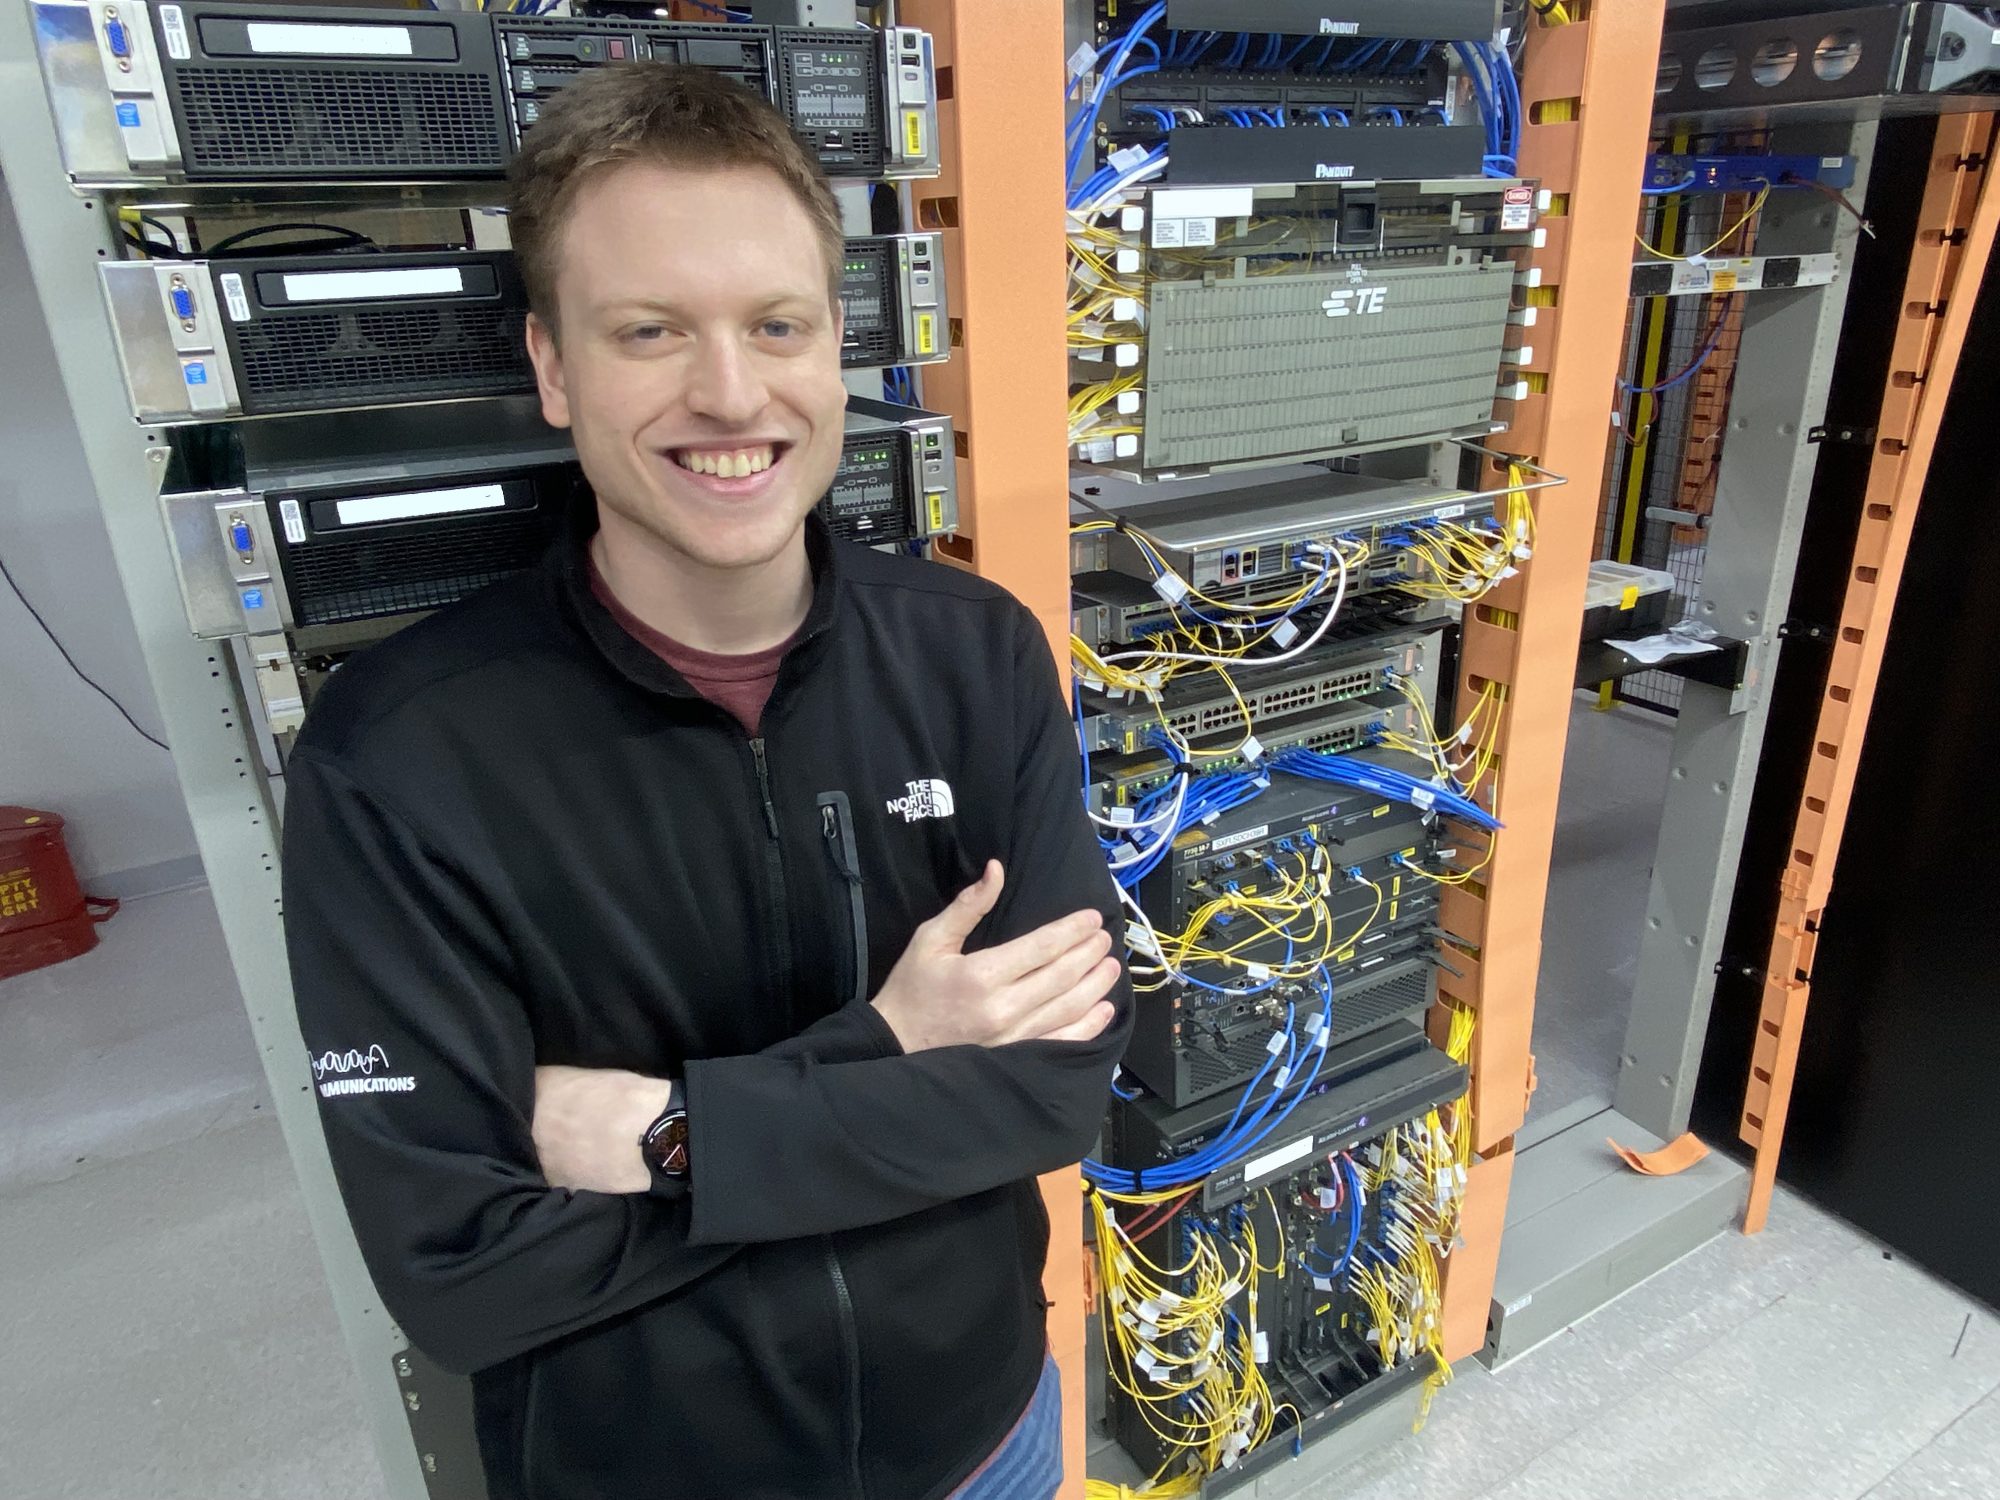 SDN Communications' Brady Andersen poses for a photo in a server room